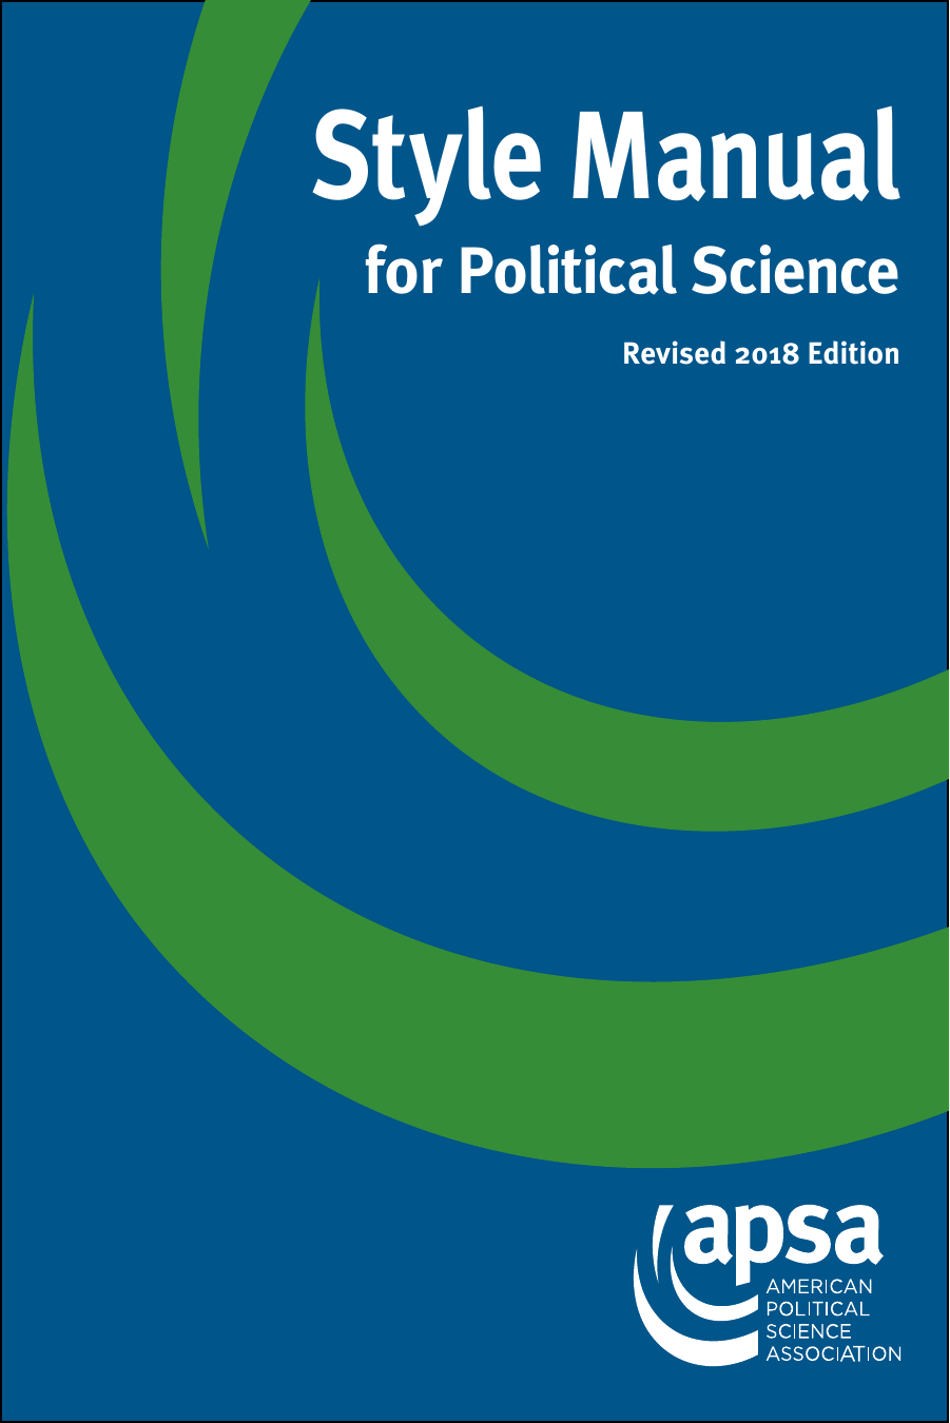 Style Manual for Political Science Apsa Download Printable PDF